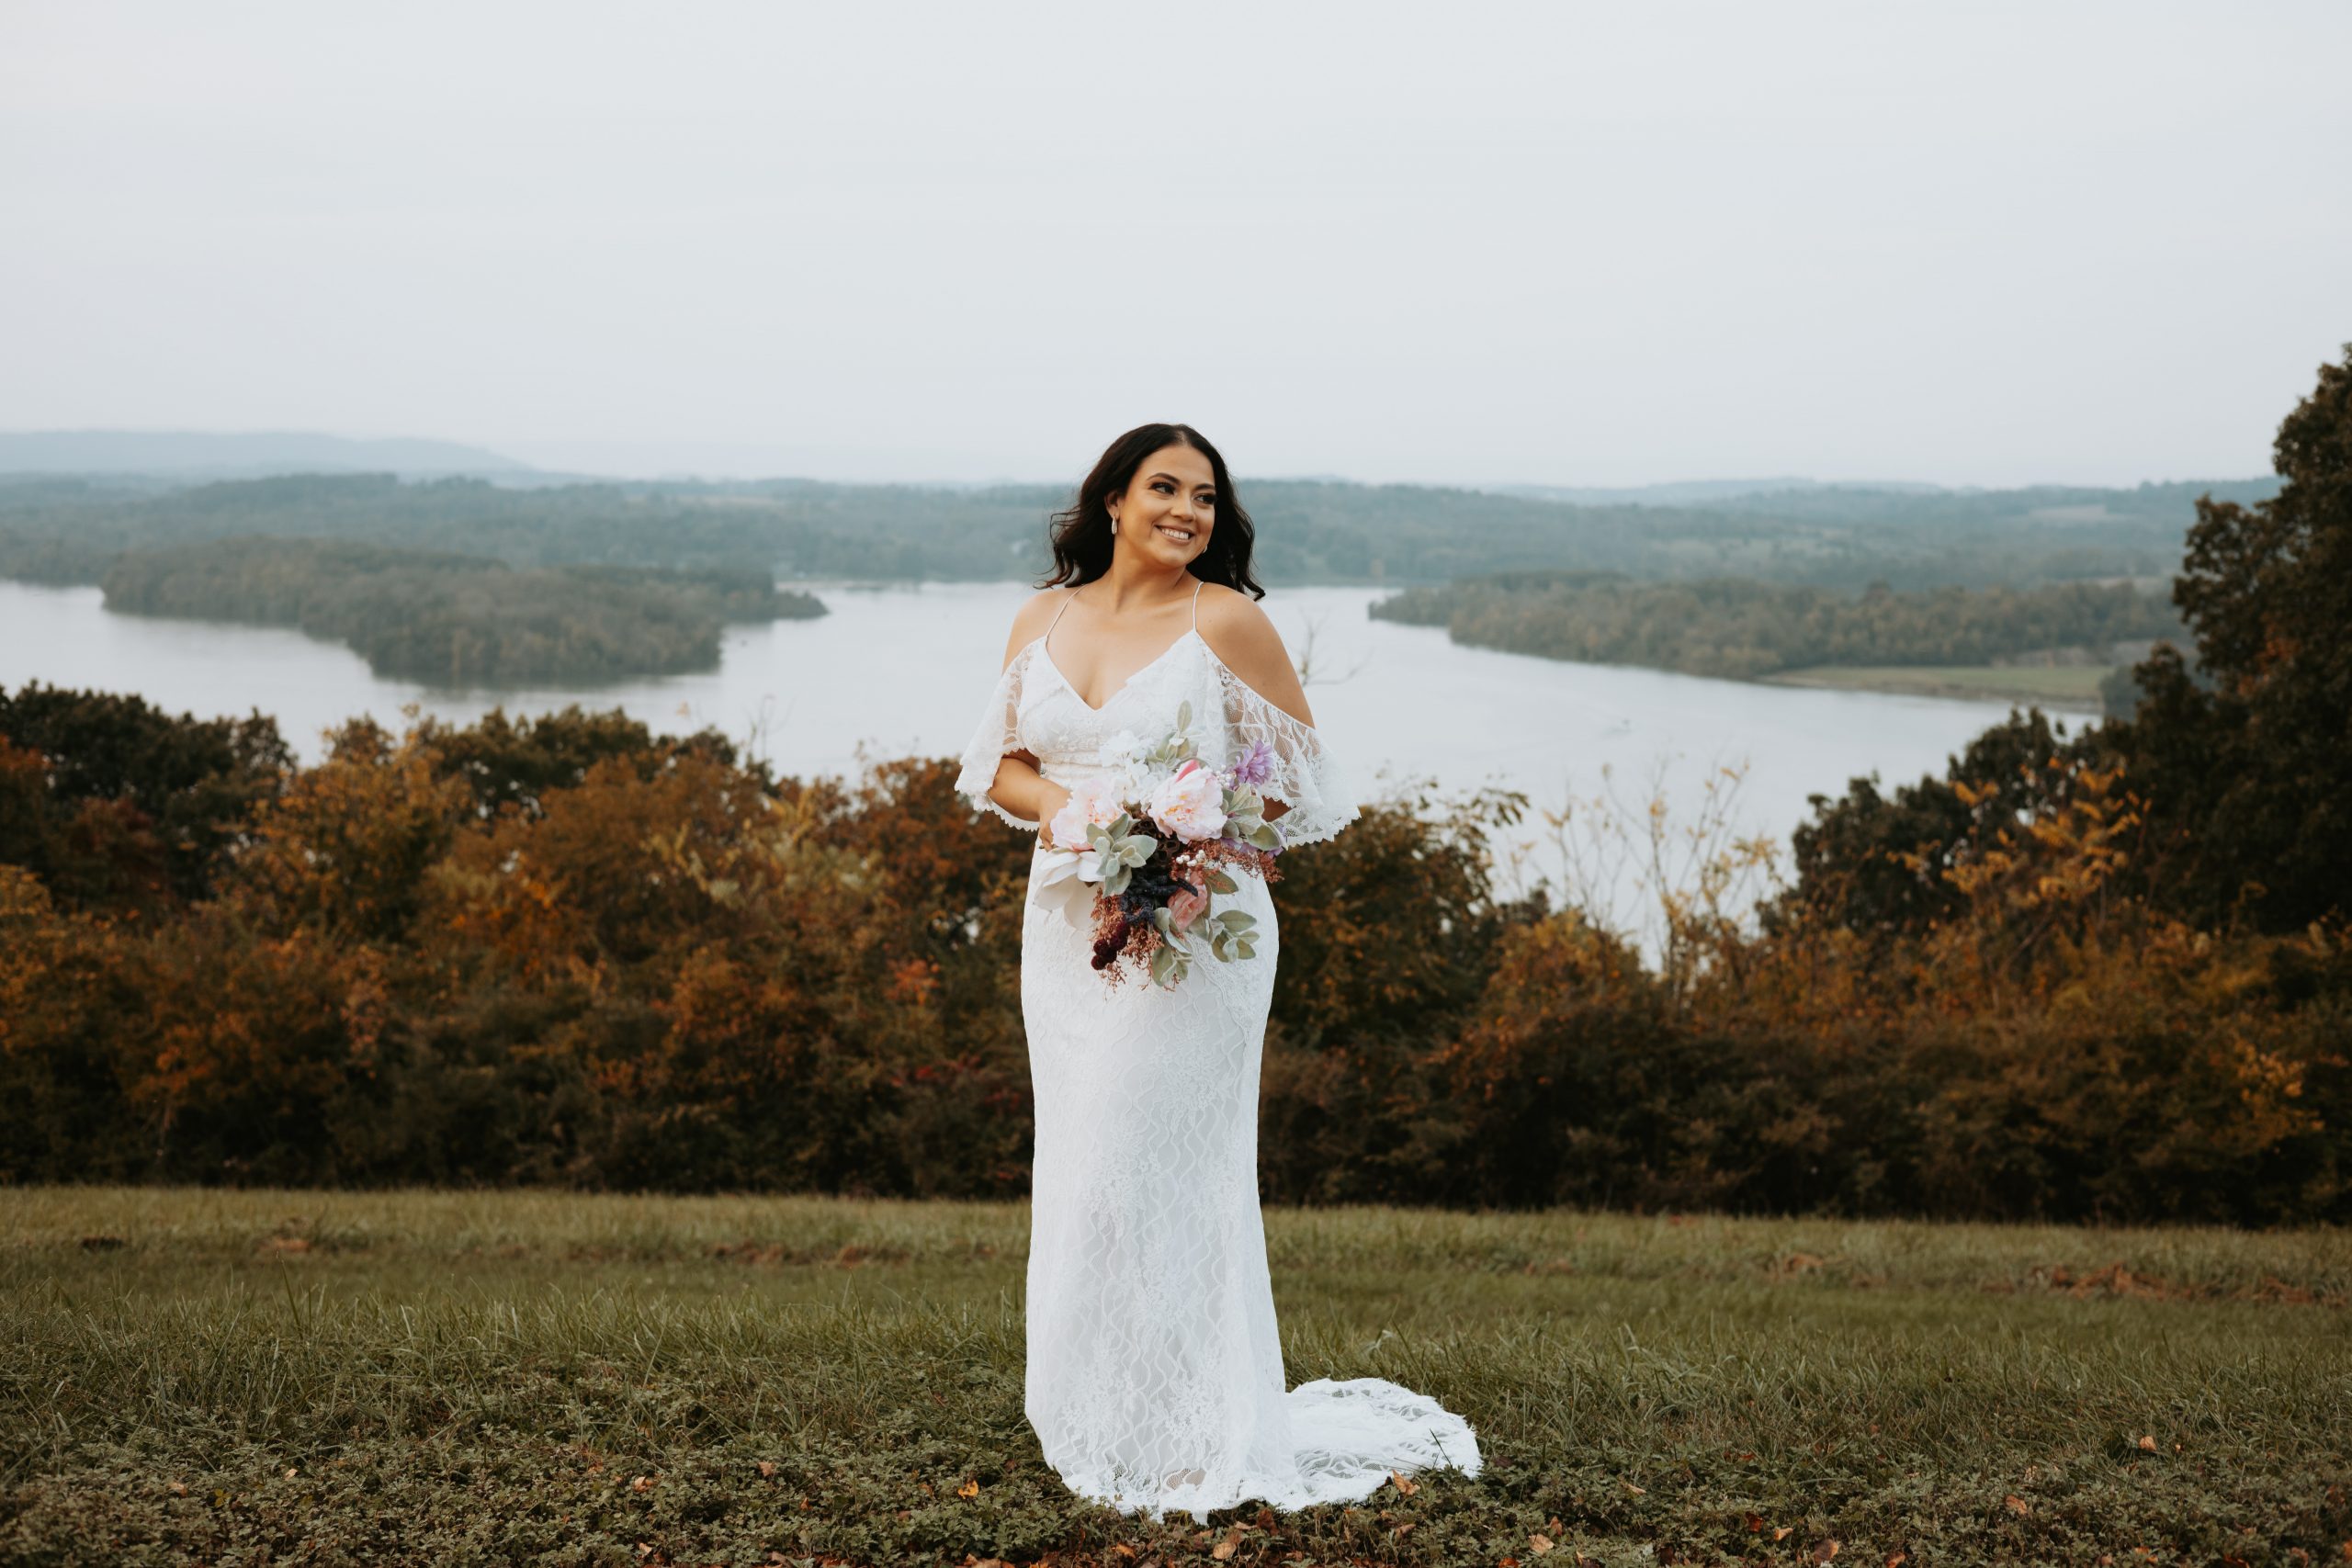 Lorena and Adrian decided to keep their vows small by choosing an intimate Lakeview elopement overlooking Blue Marsh Lake in Reading, PA